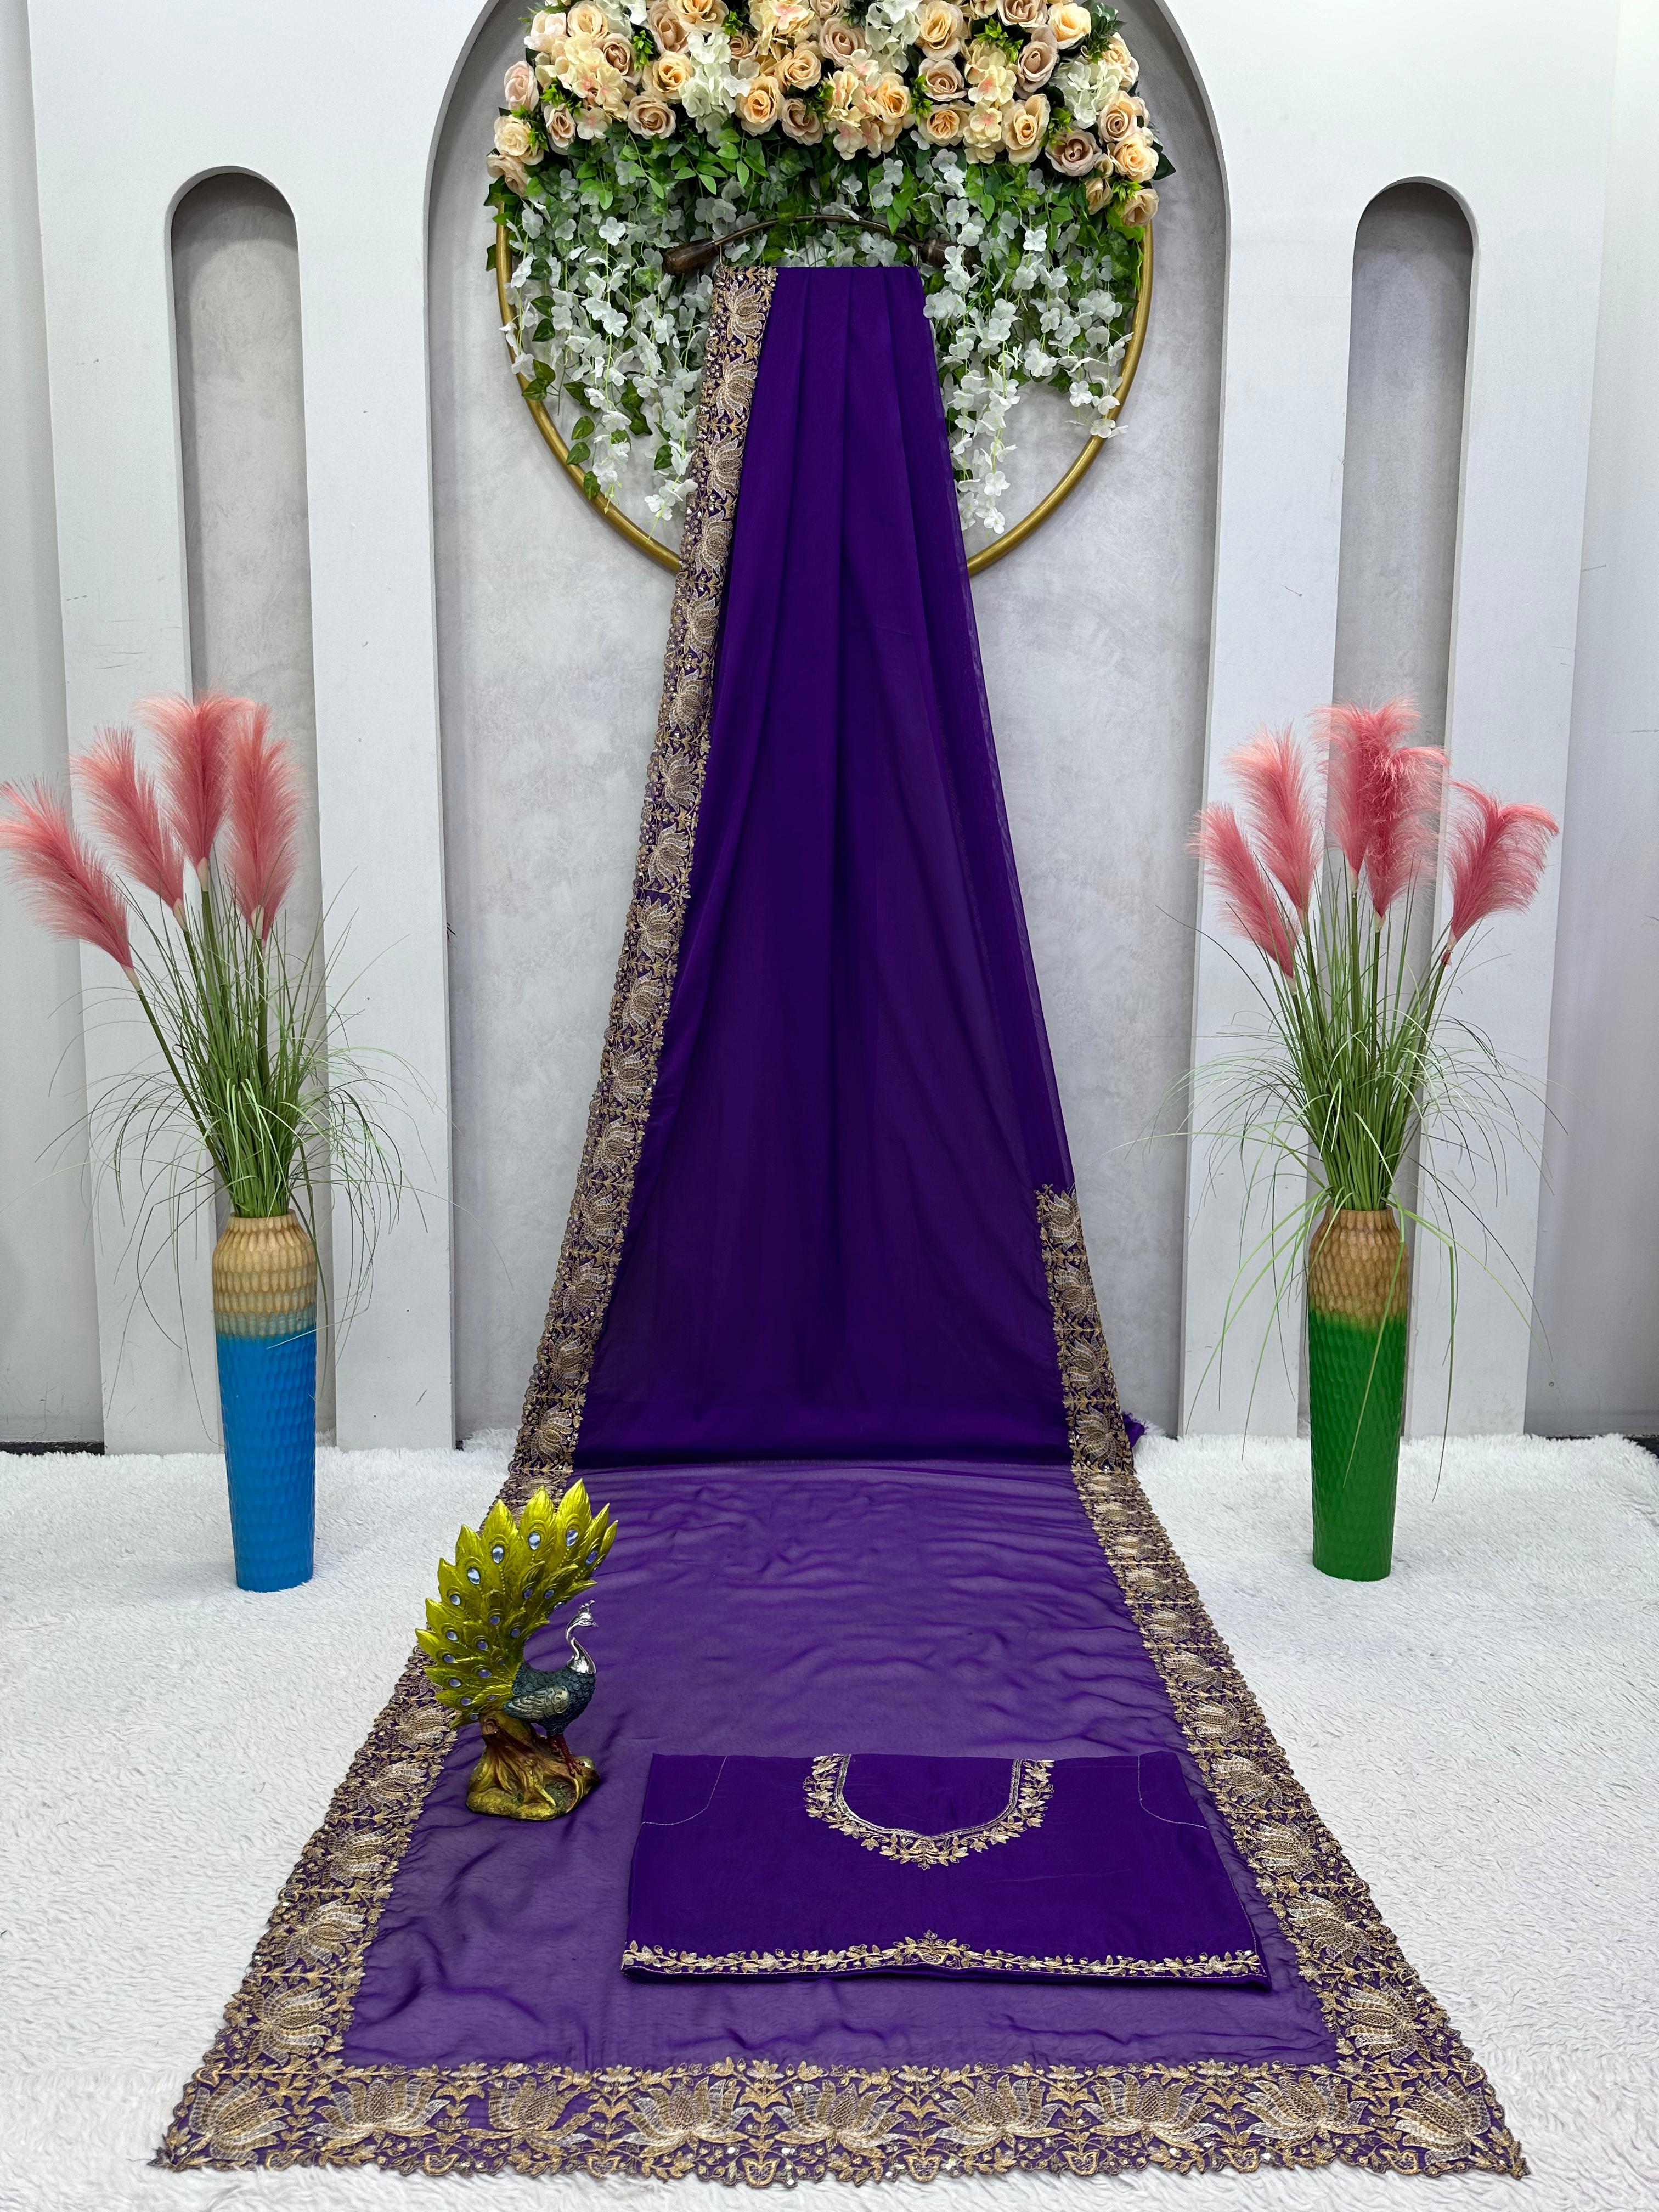 Awesome Embroidery Work Border Purple Color Saree